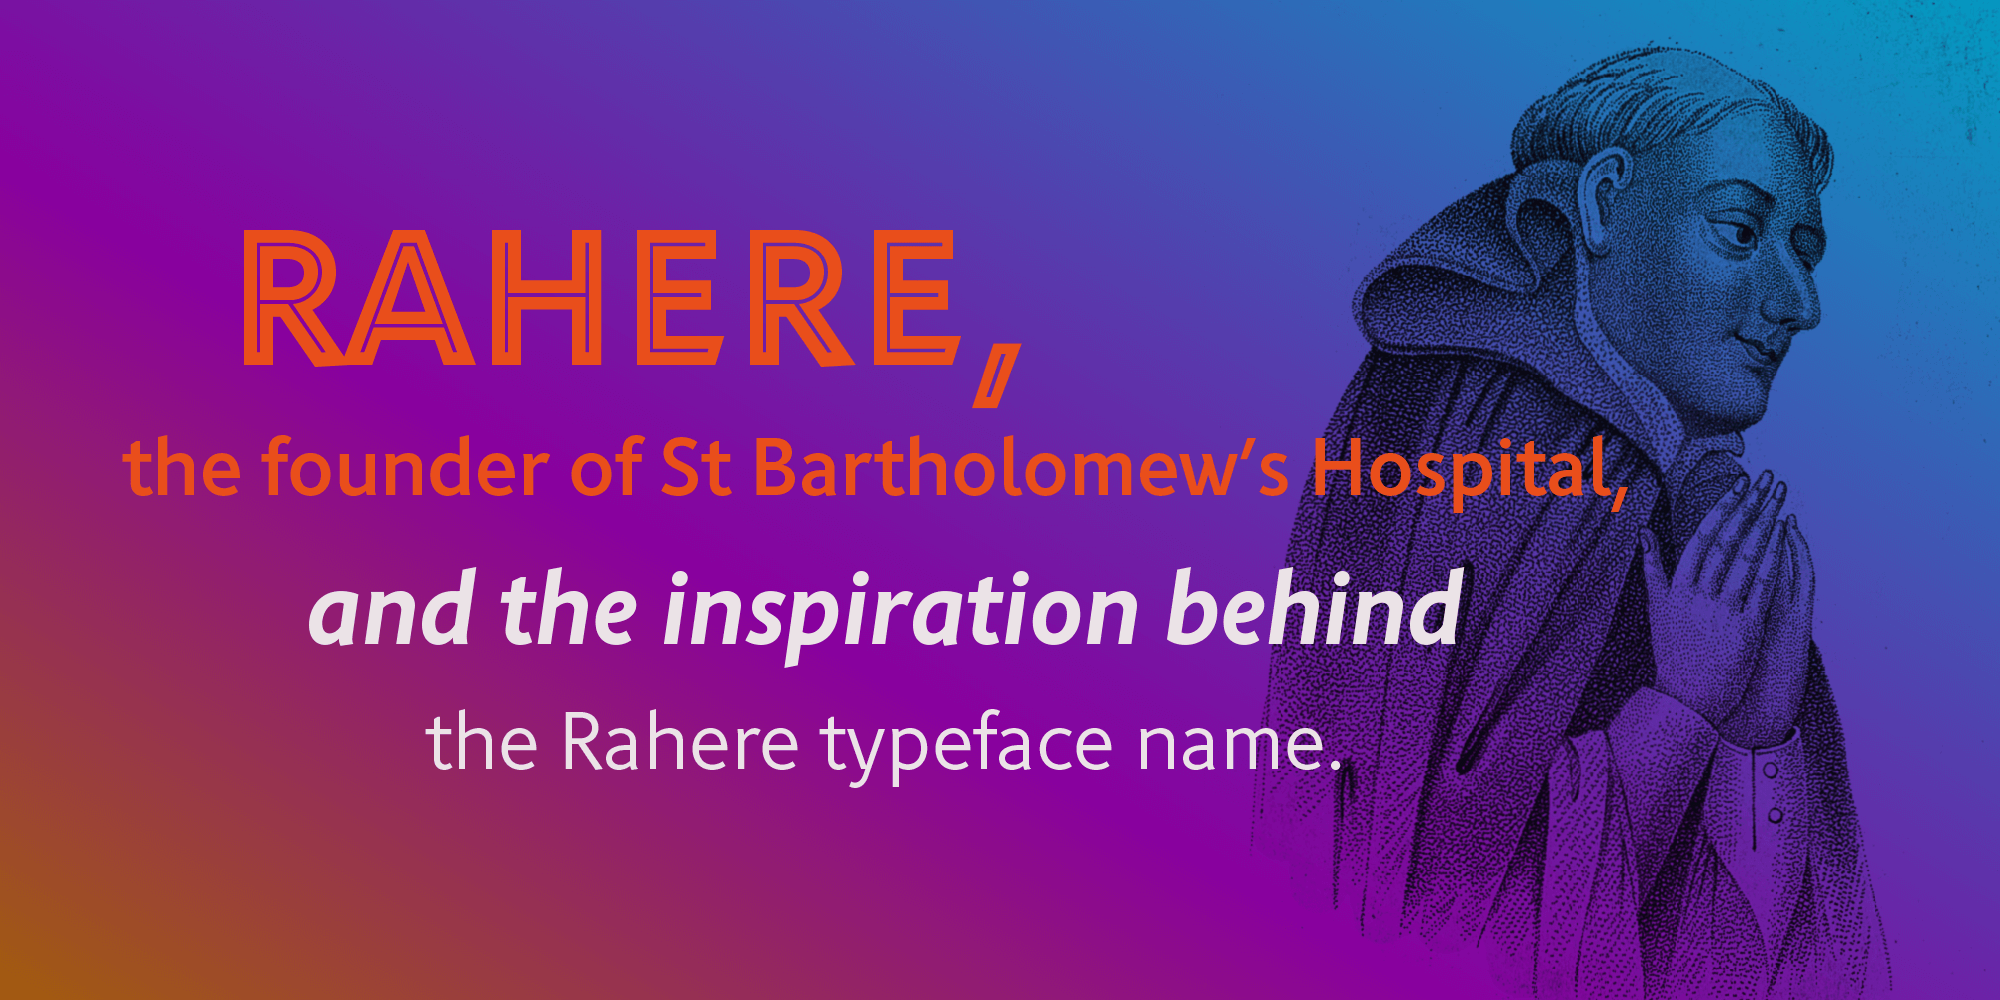 Rahere, the inspiration behind the Rahere typeface name